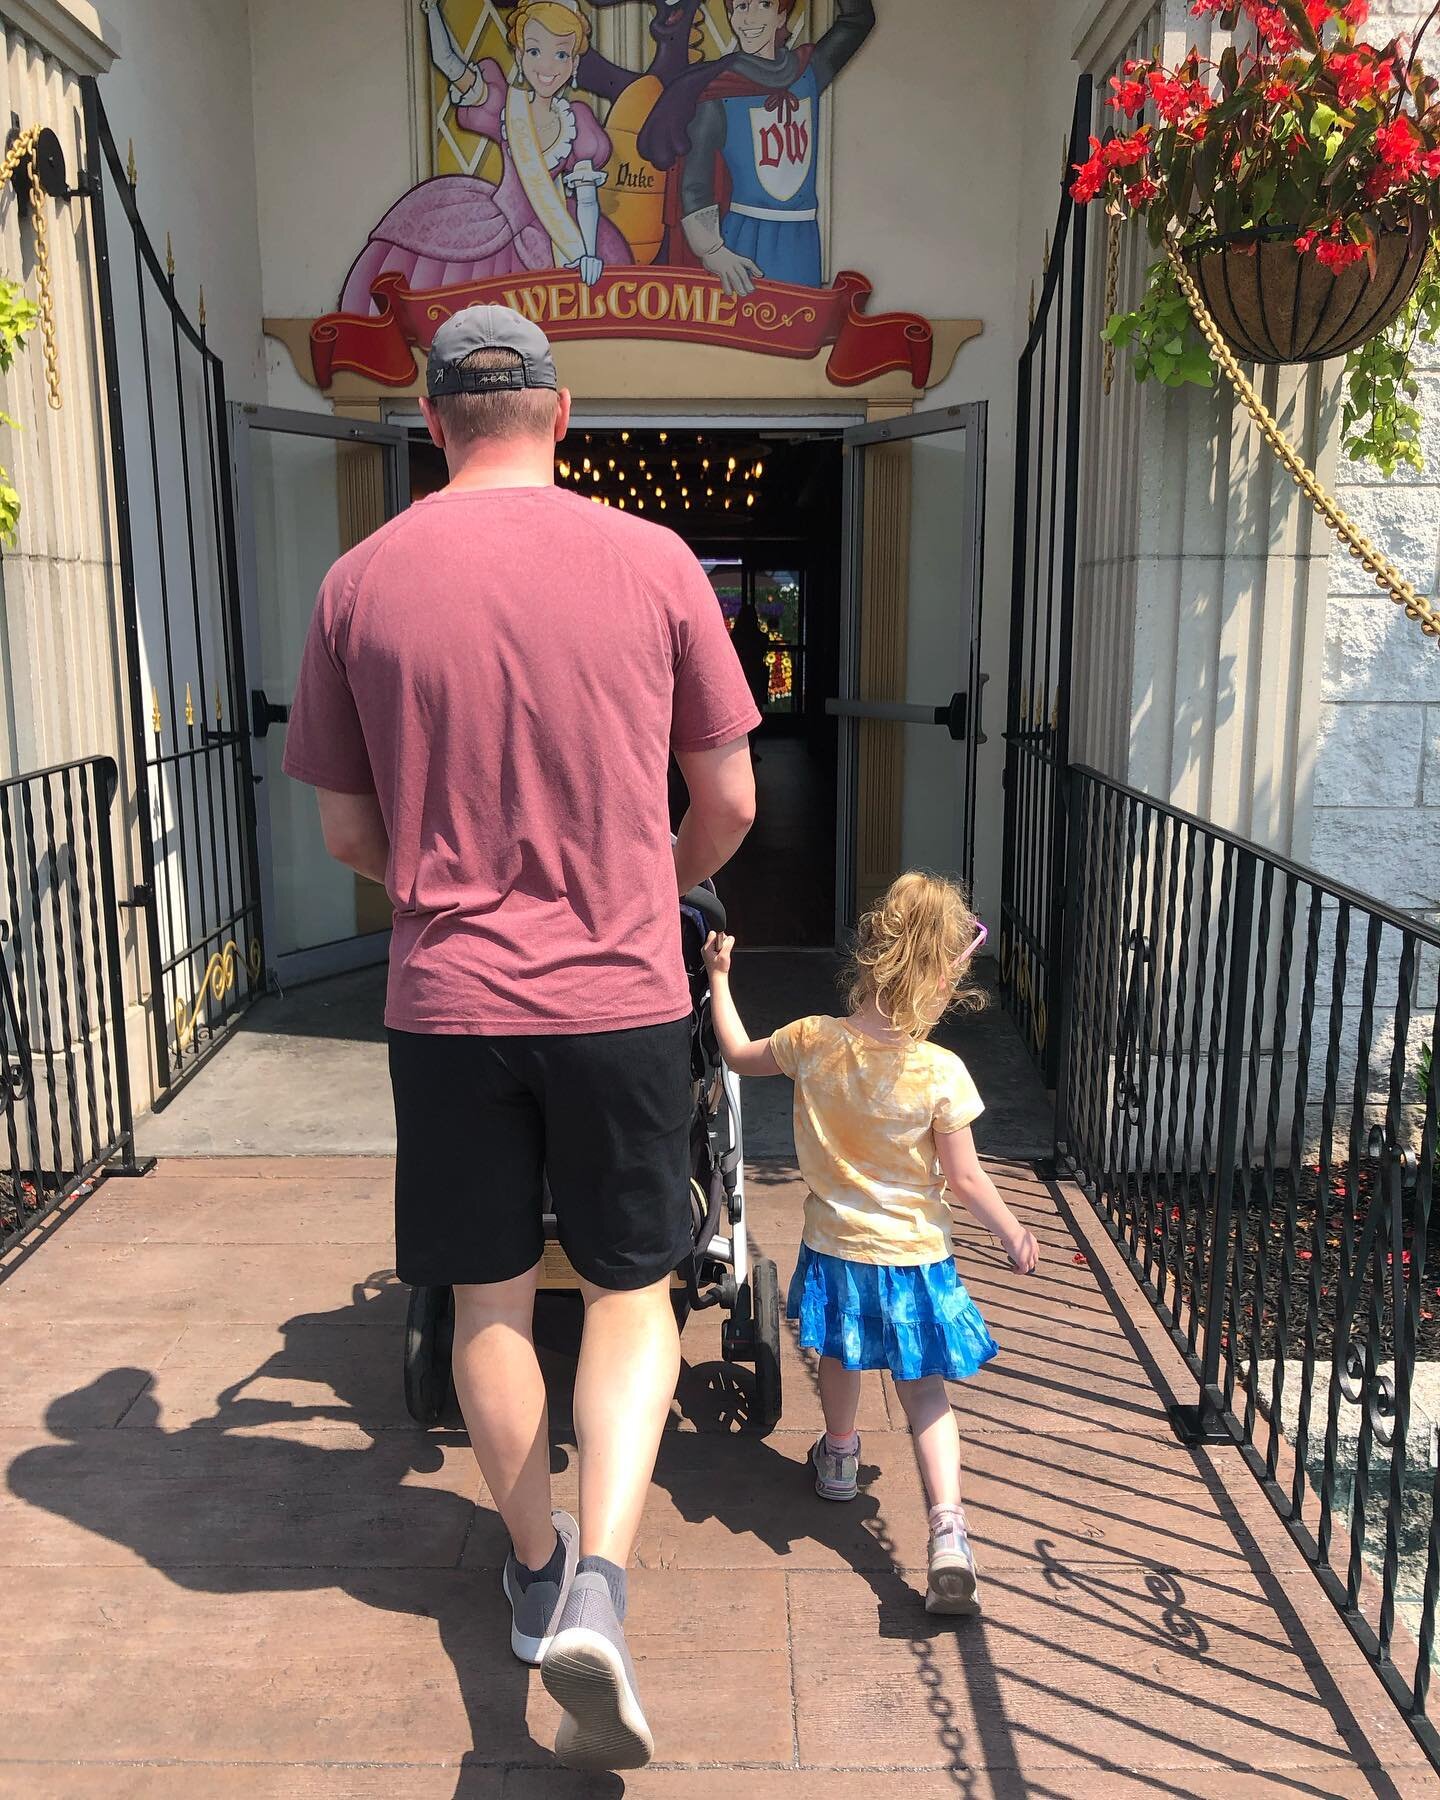 We spent our Father&rsquo;s Day riding the rides, eating ice cream, and having a blast at @dutchwonderland! 

Delaney rode her first roller coaster 🎢 and loved it! Avery only wanted to ride in a blue car 🚙 and managed to miss out on every ride but 